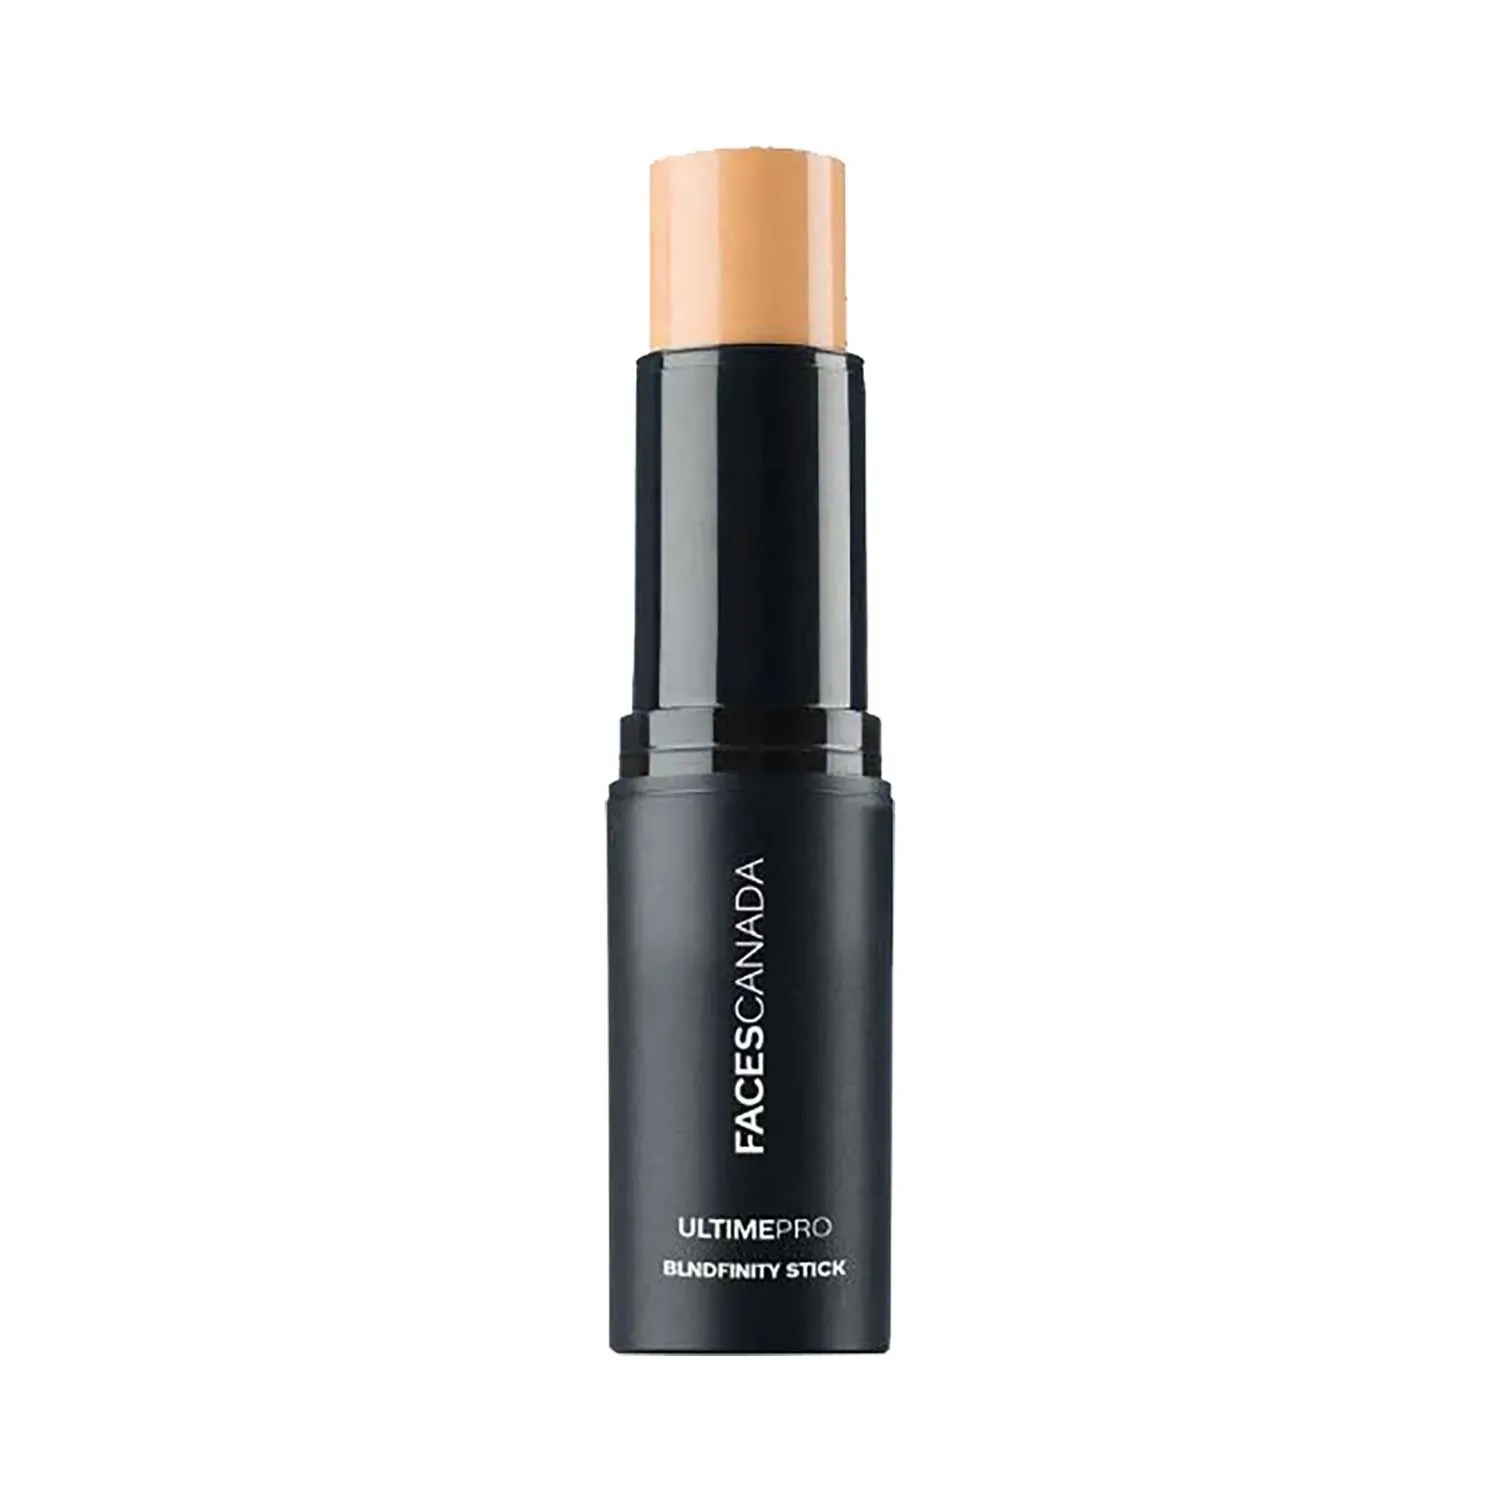 Faces Canada | Faces Canada Ultime Pro Blendfinity Stick Foundation - 03 Beige (10g)